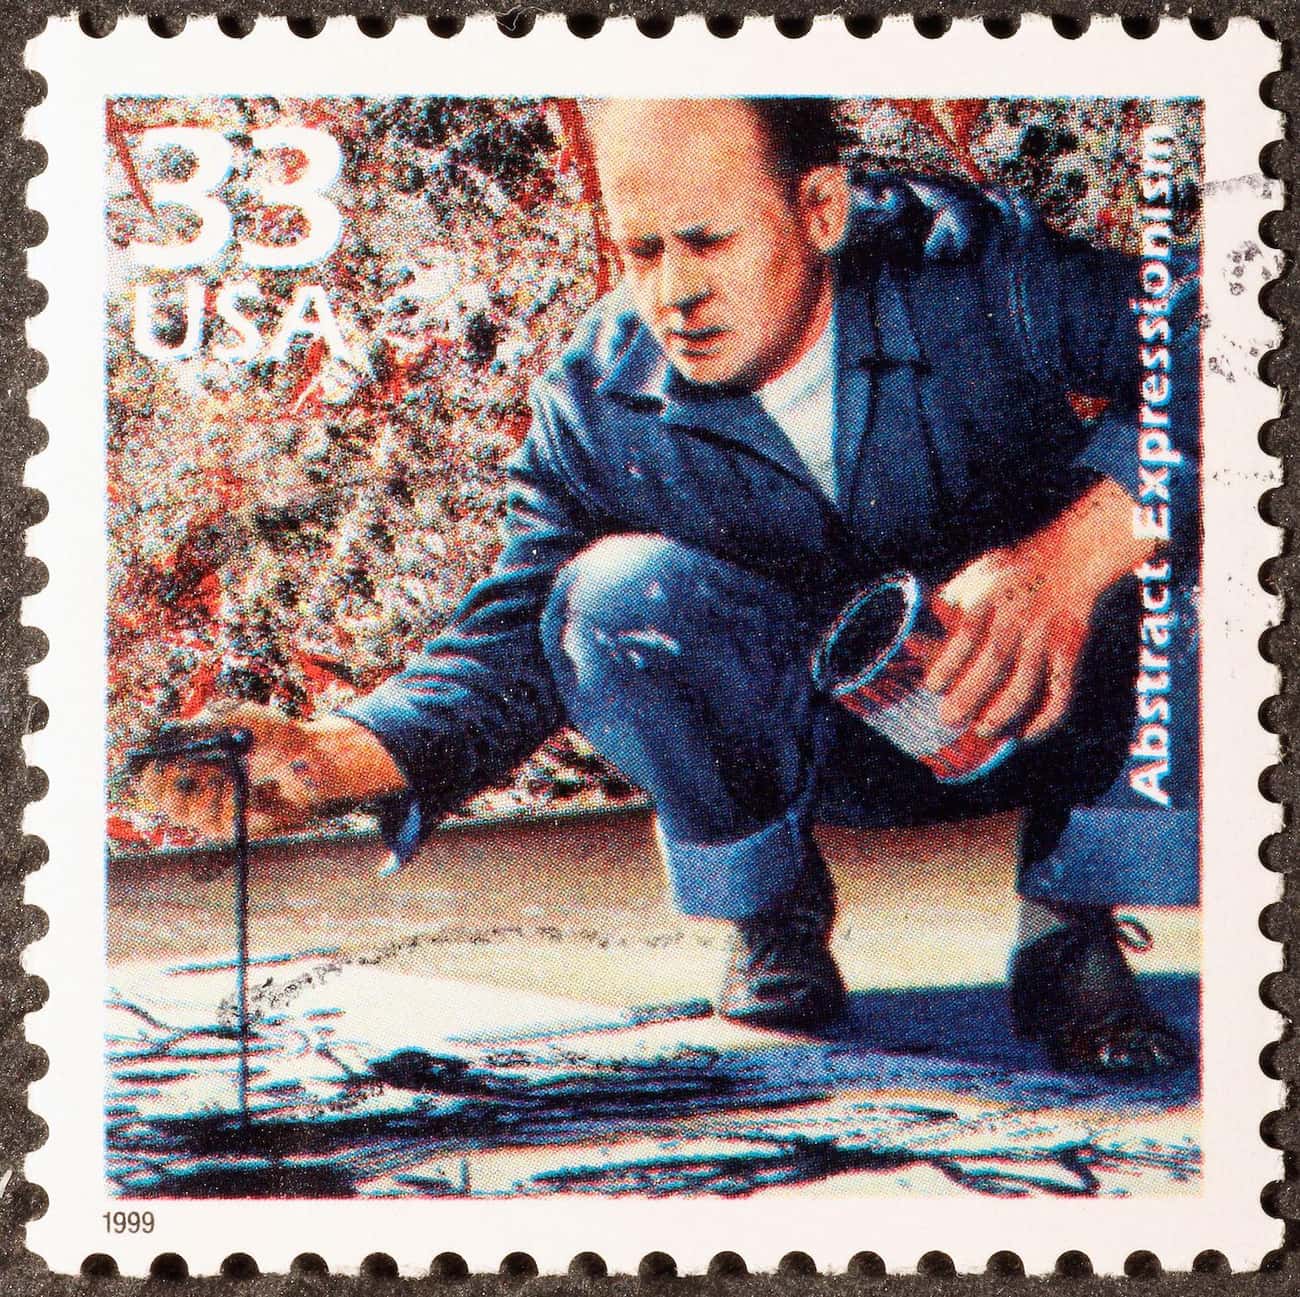 Former Members Included Artist Jackson Pollock And Other Celebrities